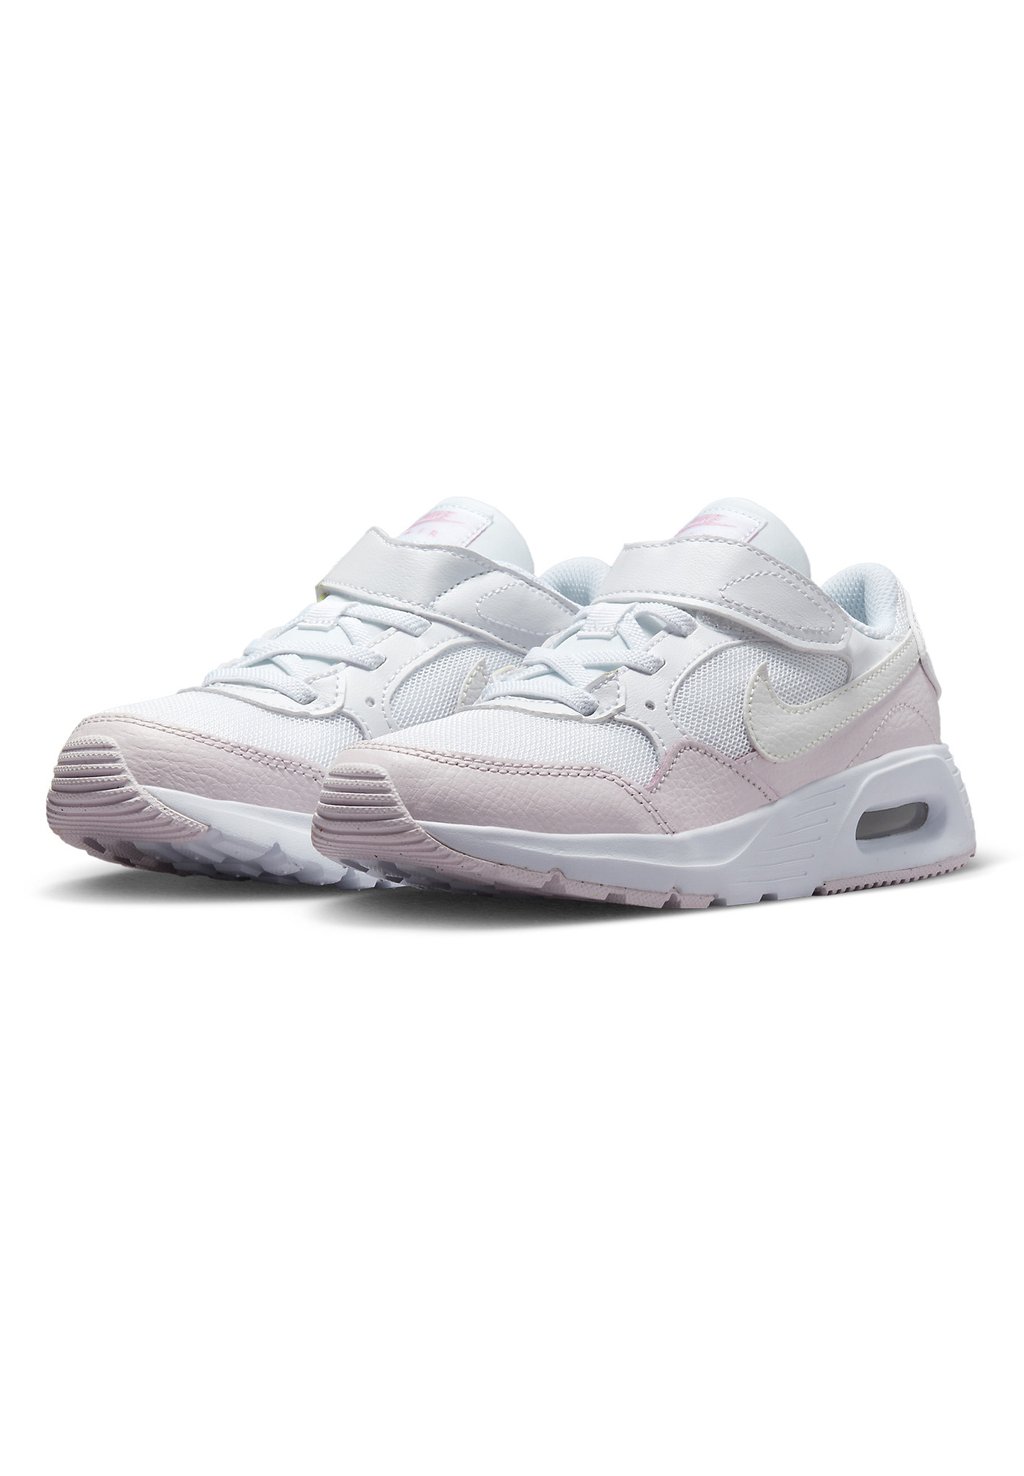 Кроссовки низкие AIR MAX UNISEX Nike Sportswear, цвет white/summit white-pearl pink med soft pink 2019 hot sale wholesale button pearl freshwater pearl aaa 8 8 5mm white pink purple button pearl